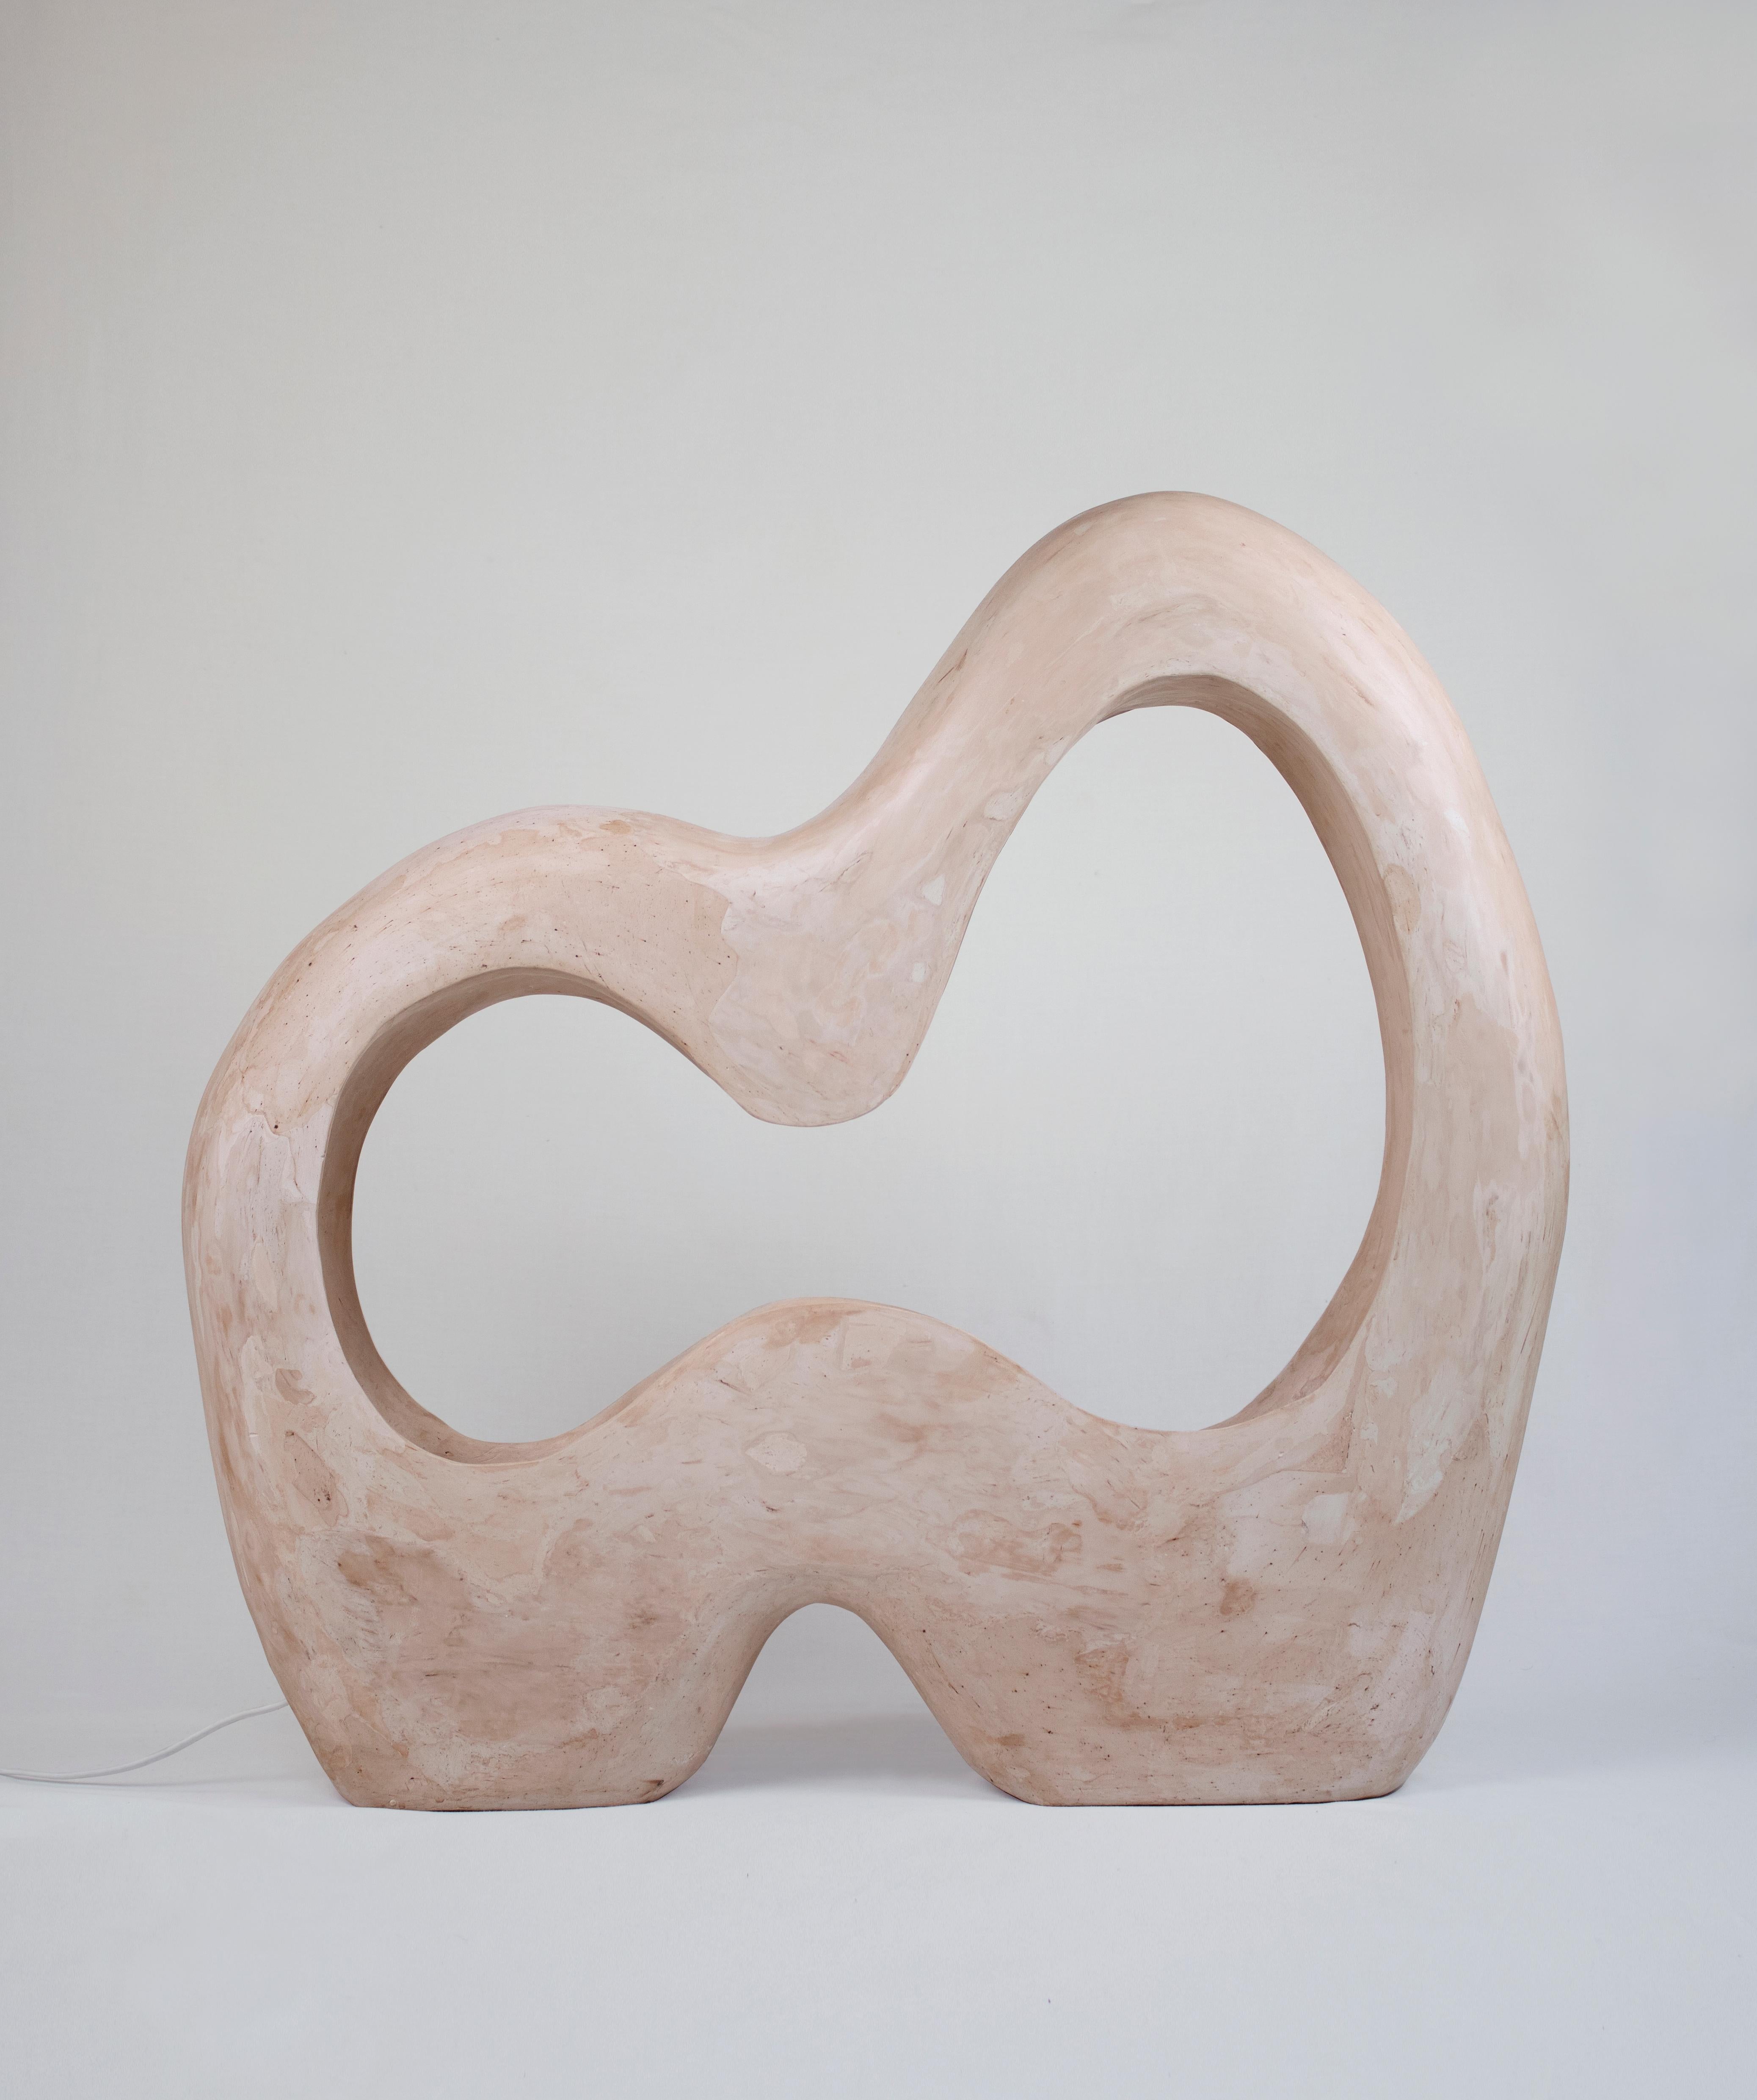 The Infinite Lamp is a contemporary handmade sculptural gypsum lamp part of the Living Forms collection. The lamp is cast in gypsum and carved by hand. The Infinite Lamp stands out as a stunning blend of fine art and functional design. It's a part